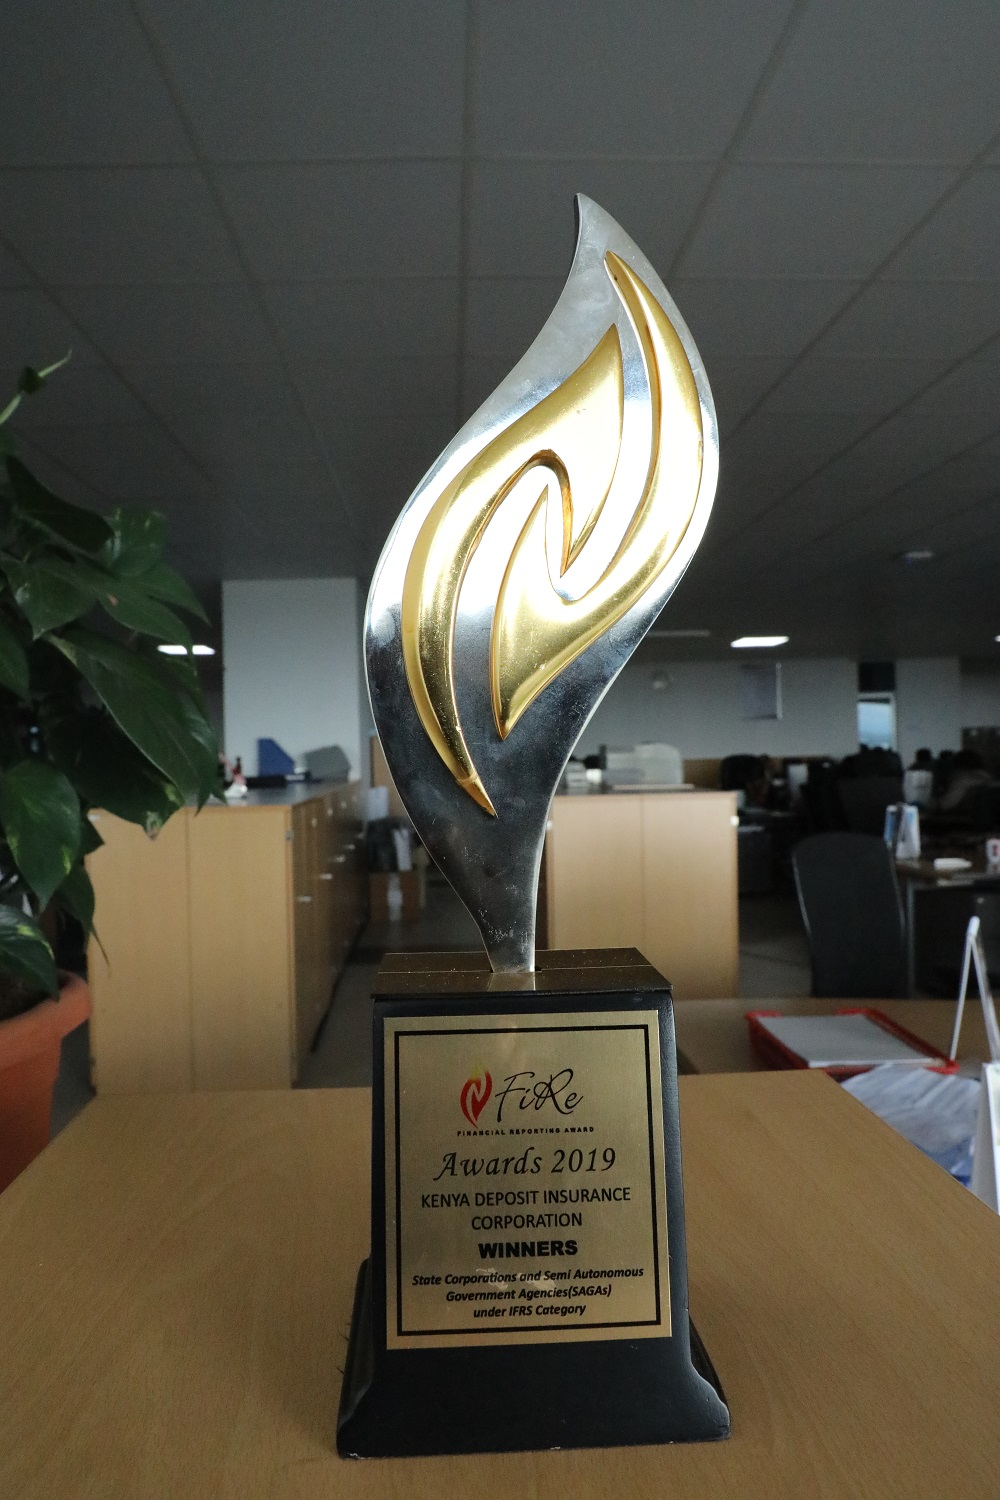 Seeing is believing....The 2019 FiRe Award trophy, a testament to KDIC's prowess in financial reporting.